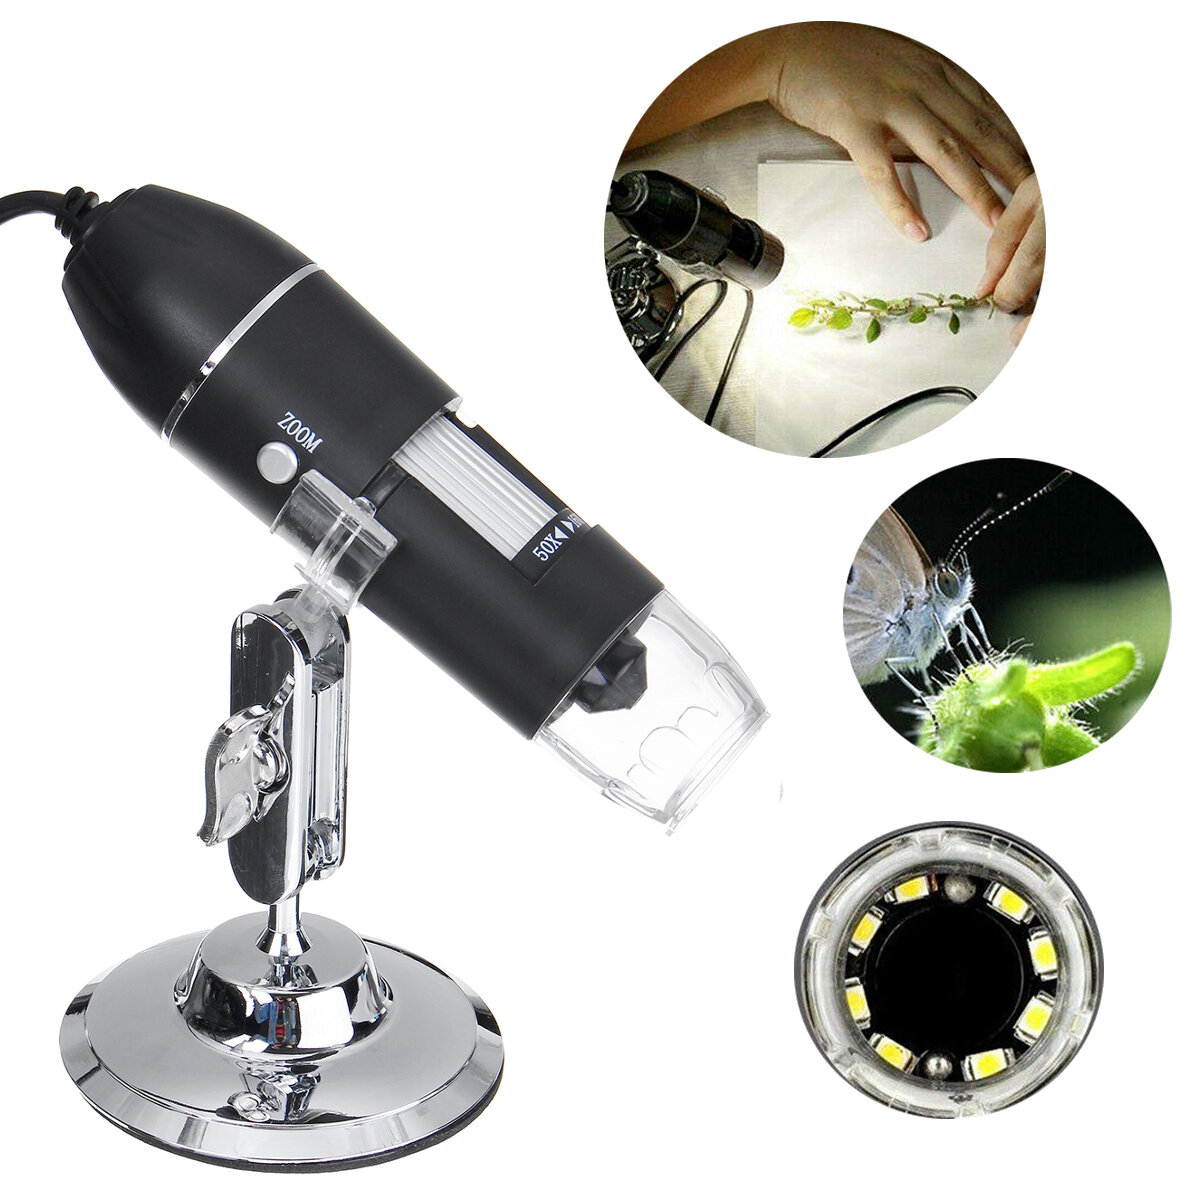 best price,1600x,8led,2mp,usb,zoom,digital,microscope,coupon,price,discount